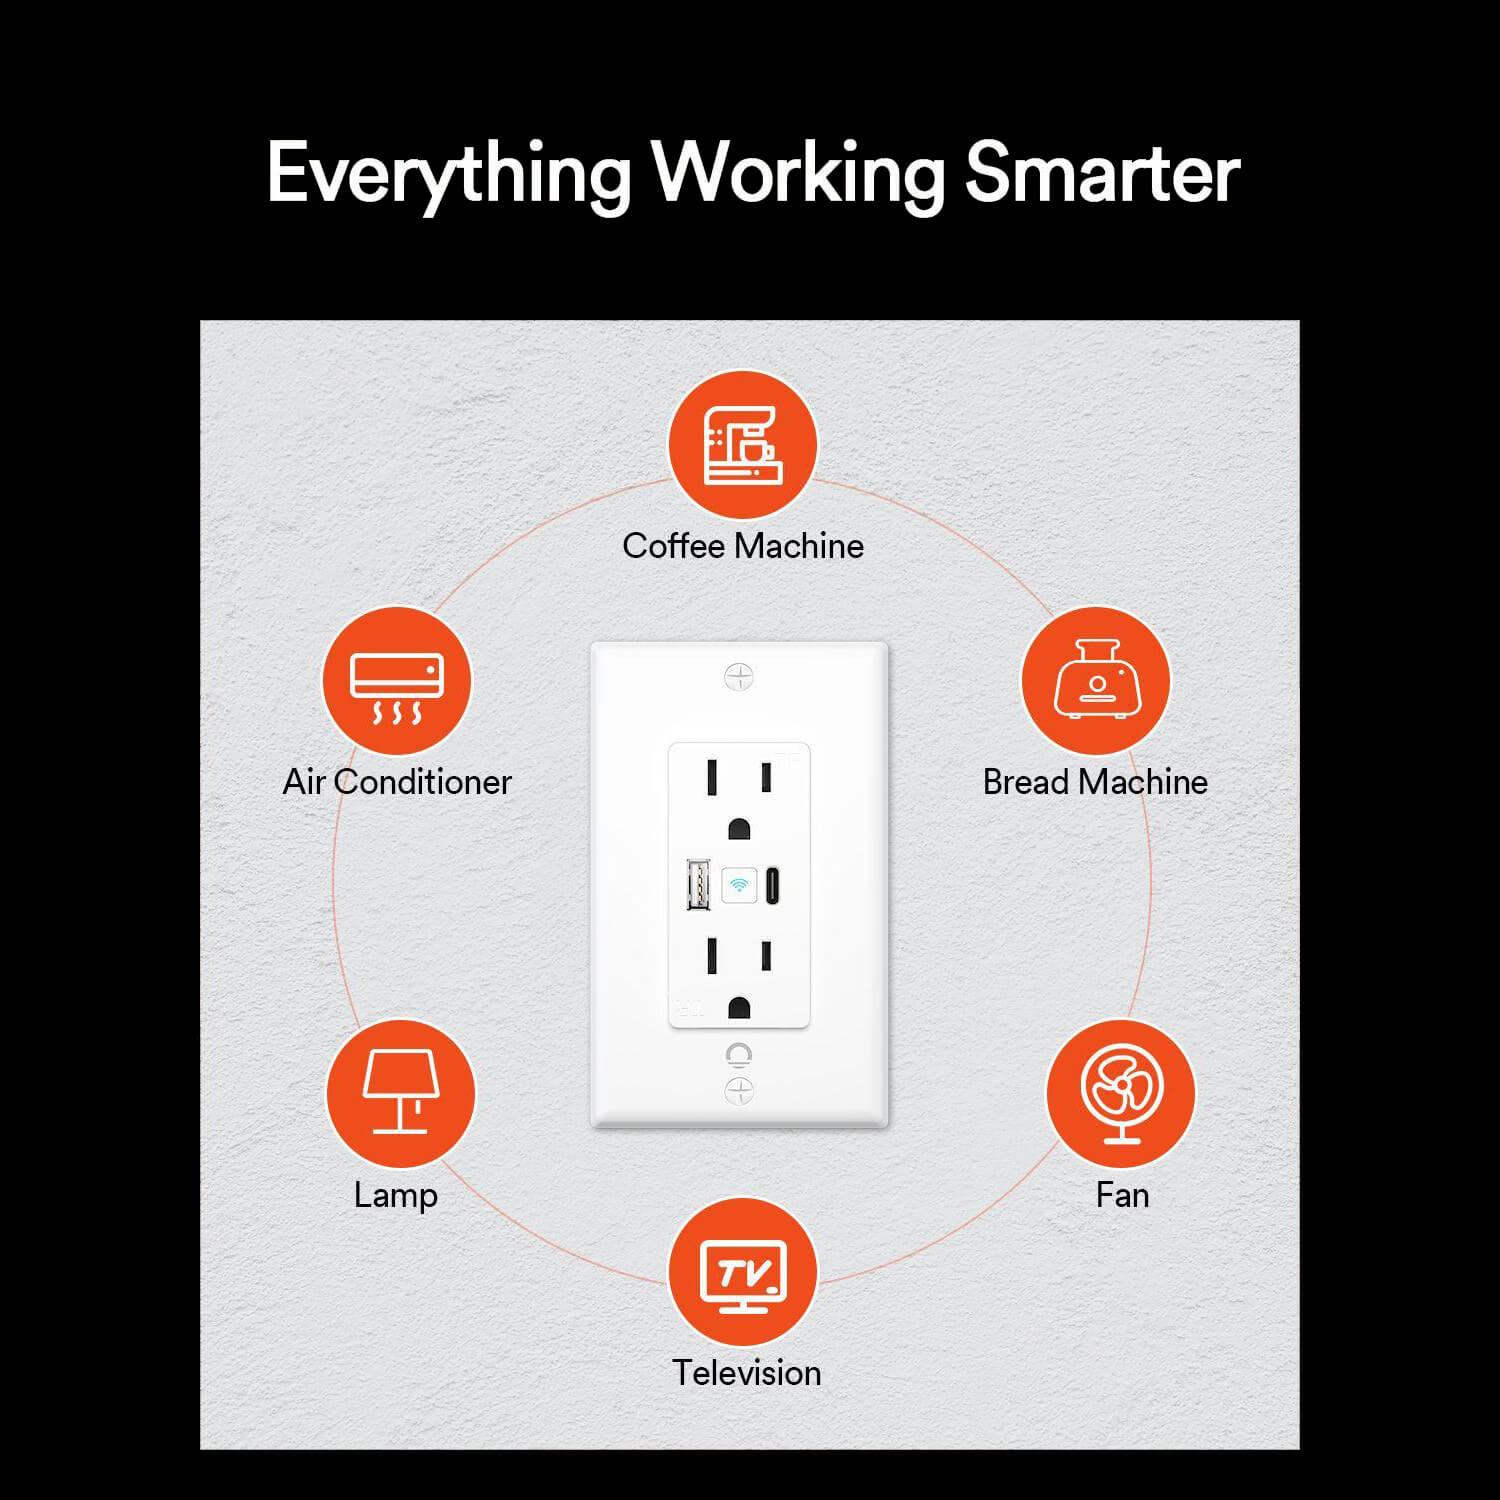 iLintek Lumary Smart WiFi In-Wall Outlet 15 Amp Tamper Resistant Split Duplex Receptacle - 2 Plugs, Compatible with Alexa, Google Home (